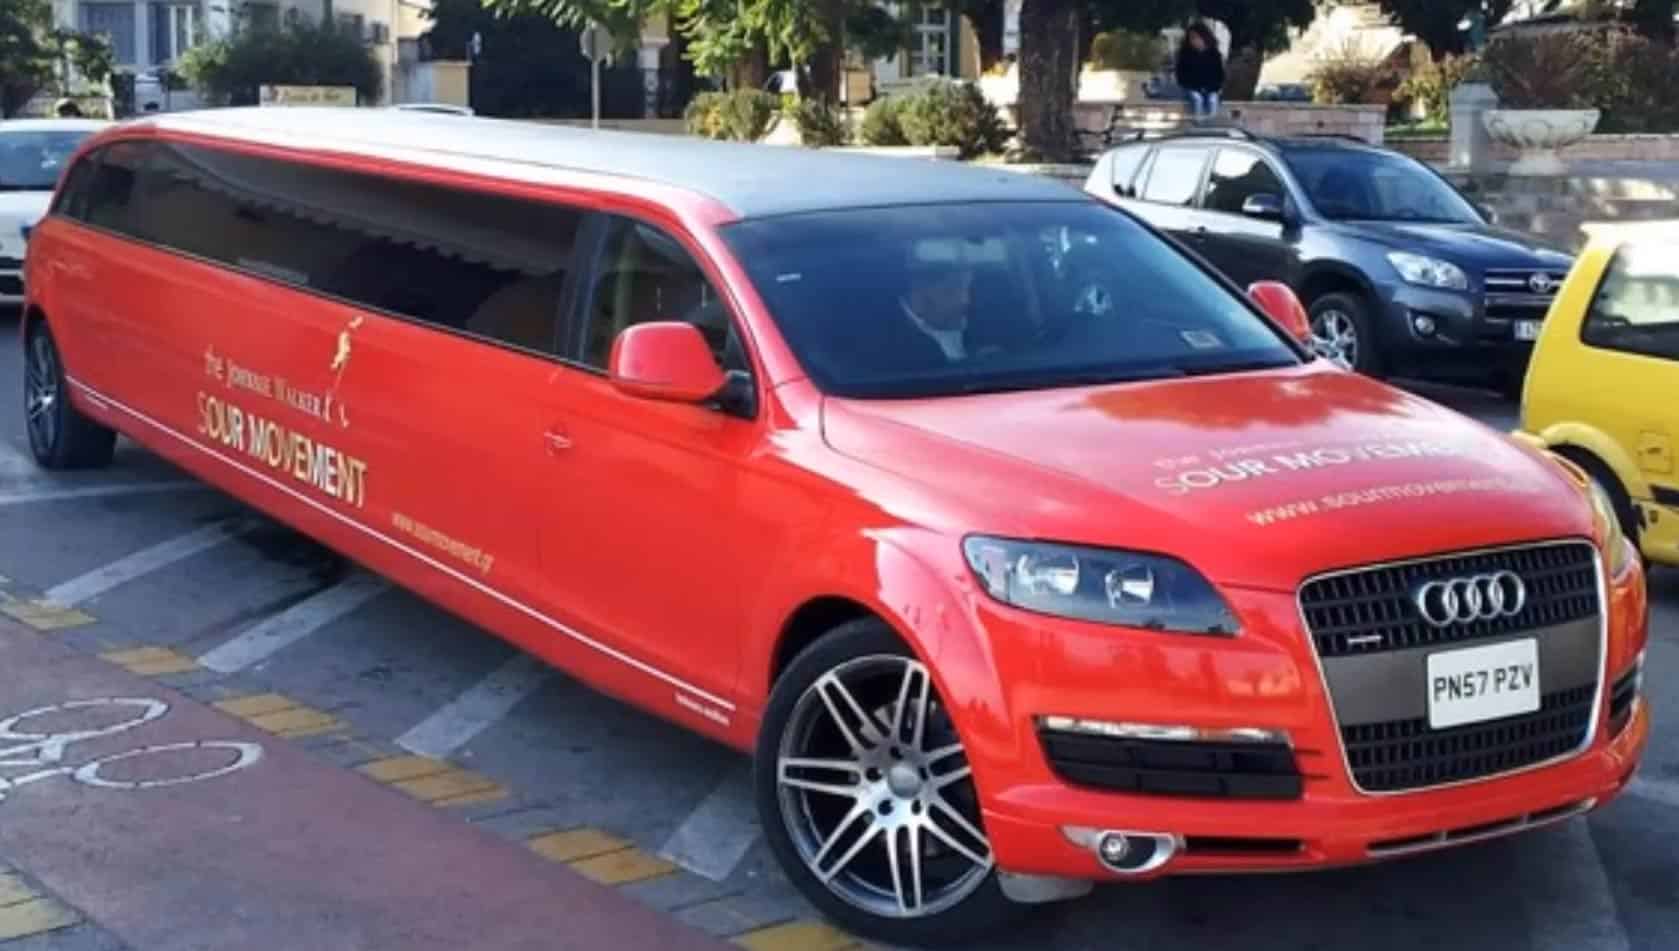 Audi Limo(Car Scoops)